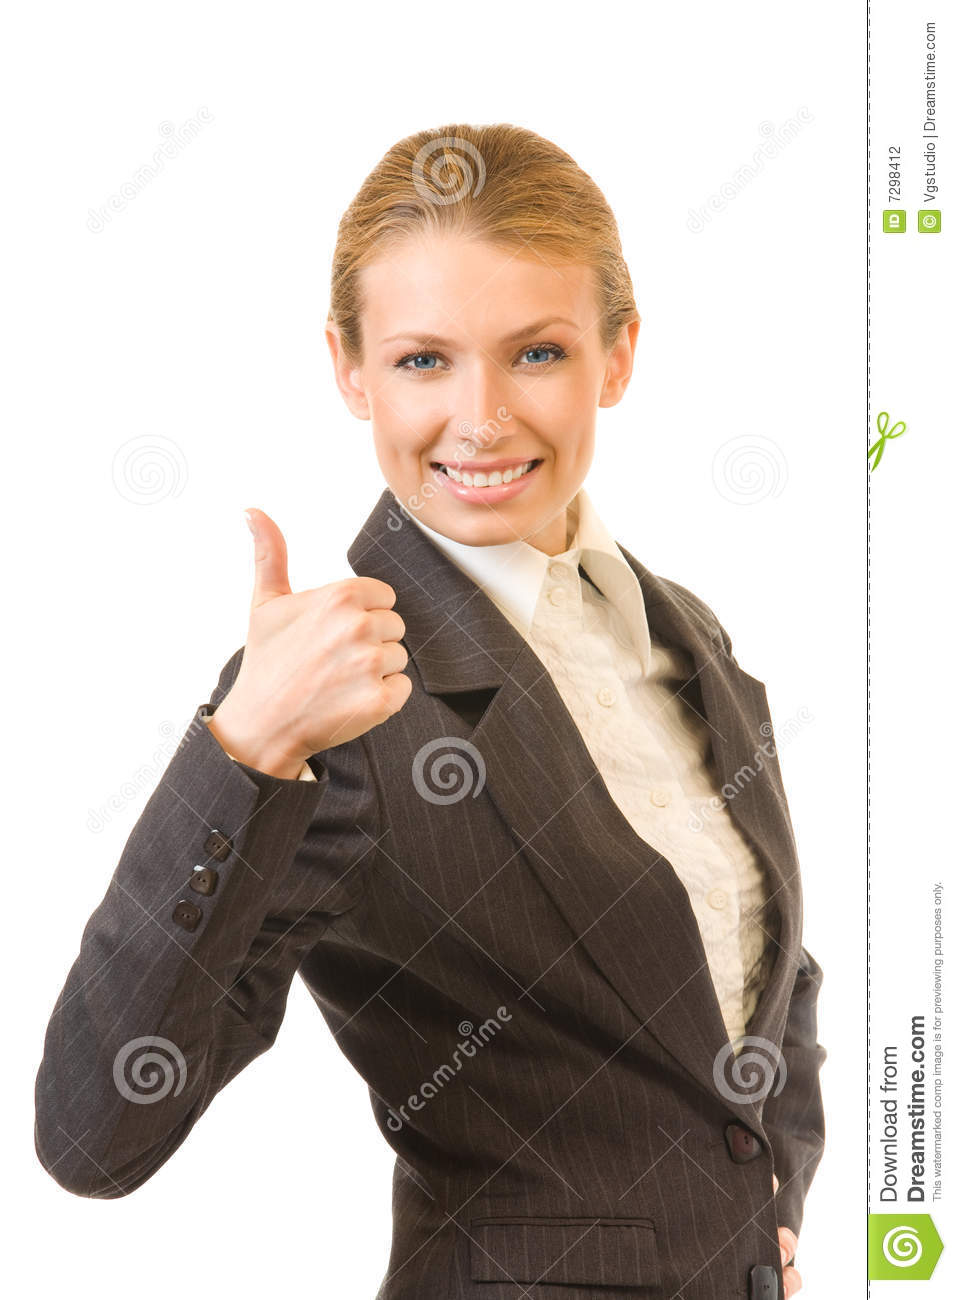 Businesswoman Thumbs Up